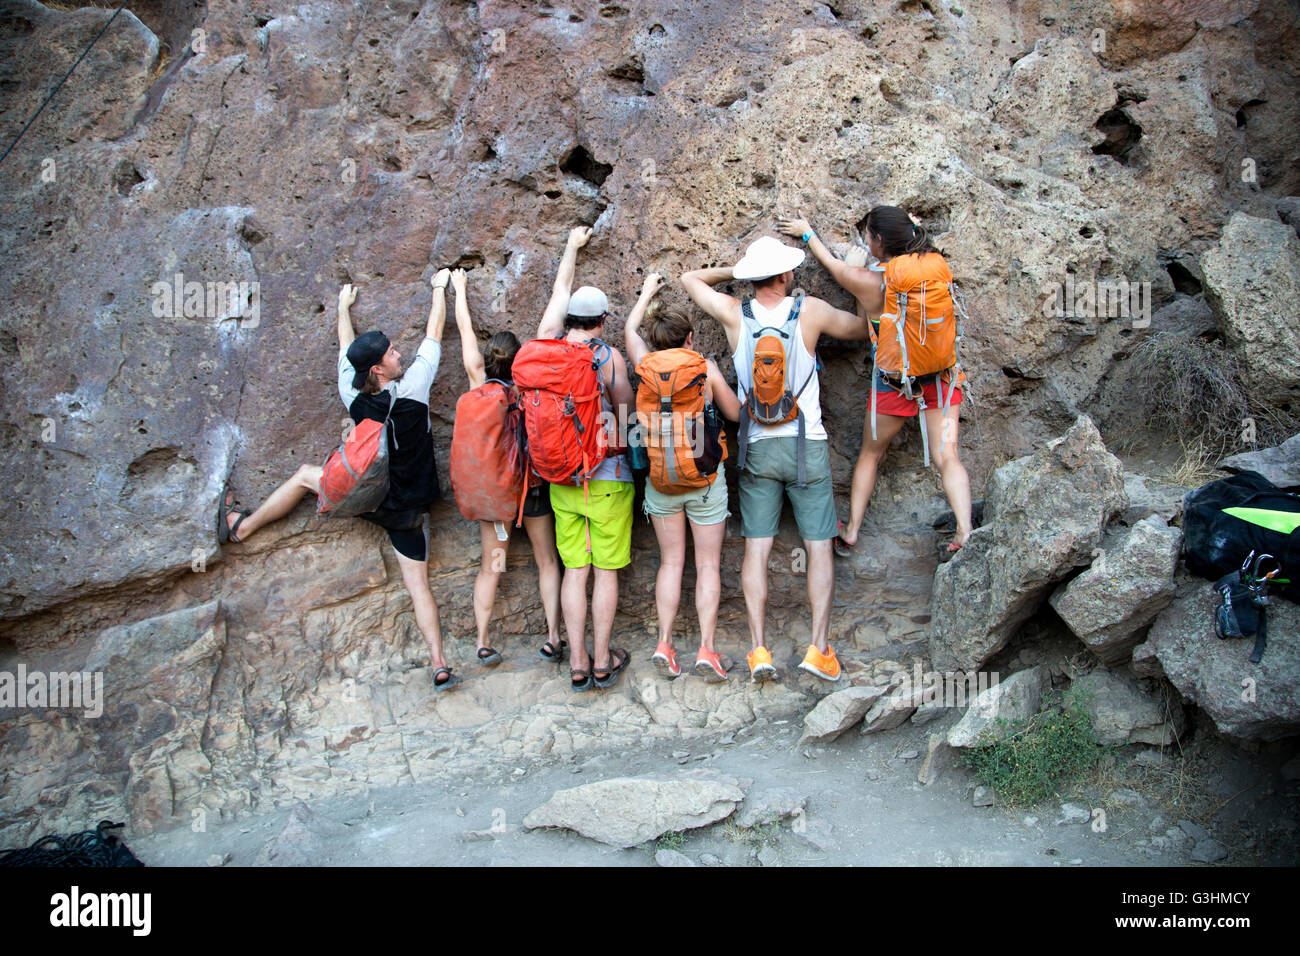 Rear view of group of friends side by side clinging onto rock face Stock Photo